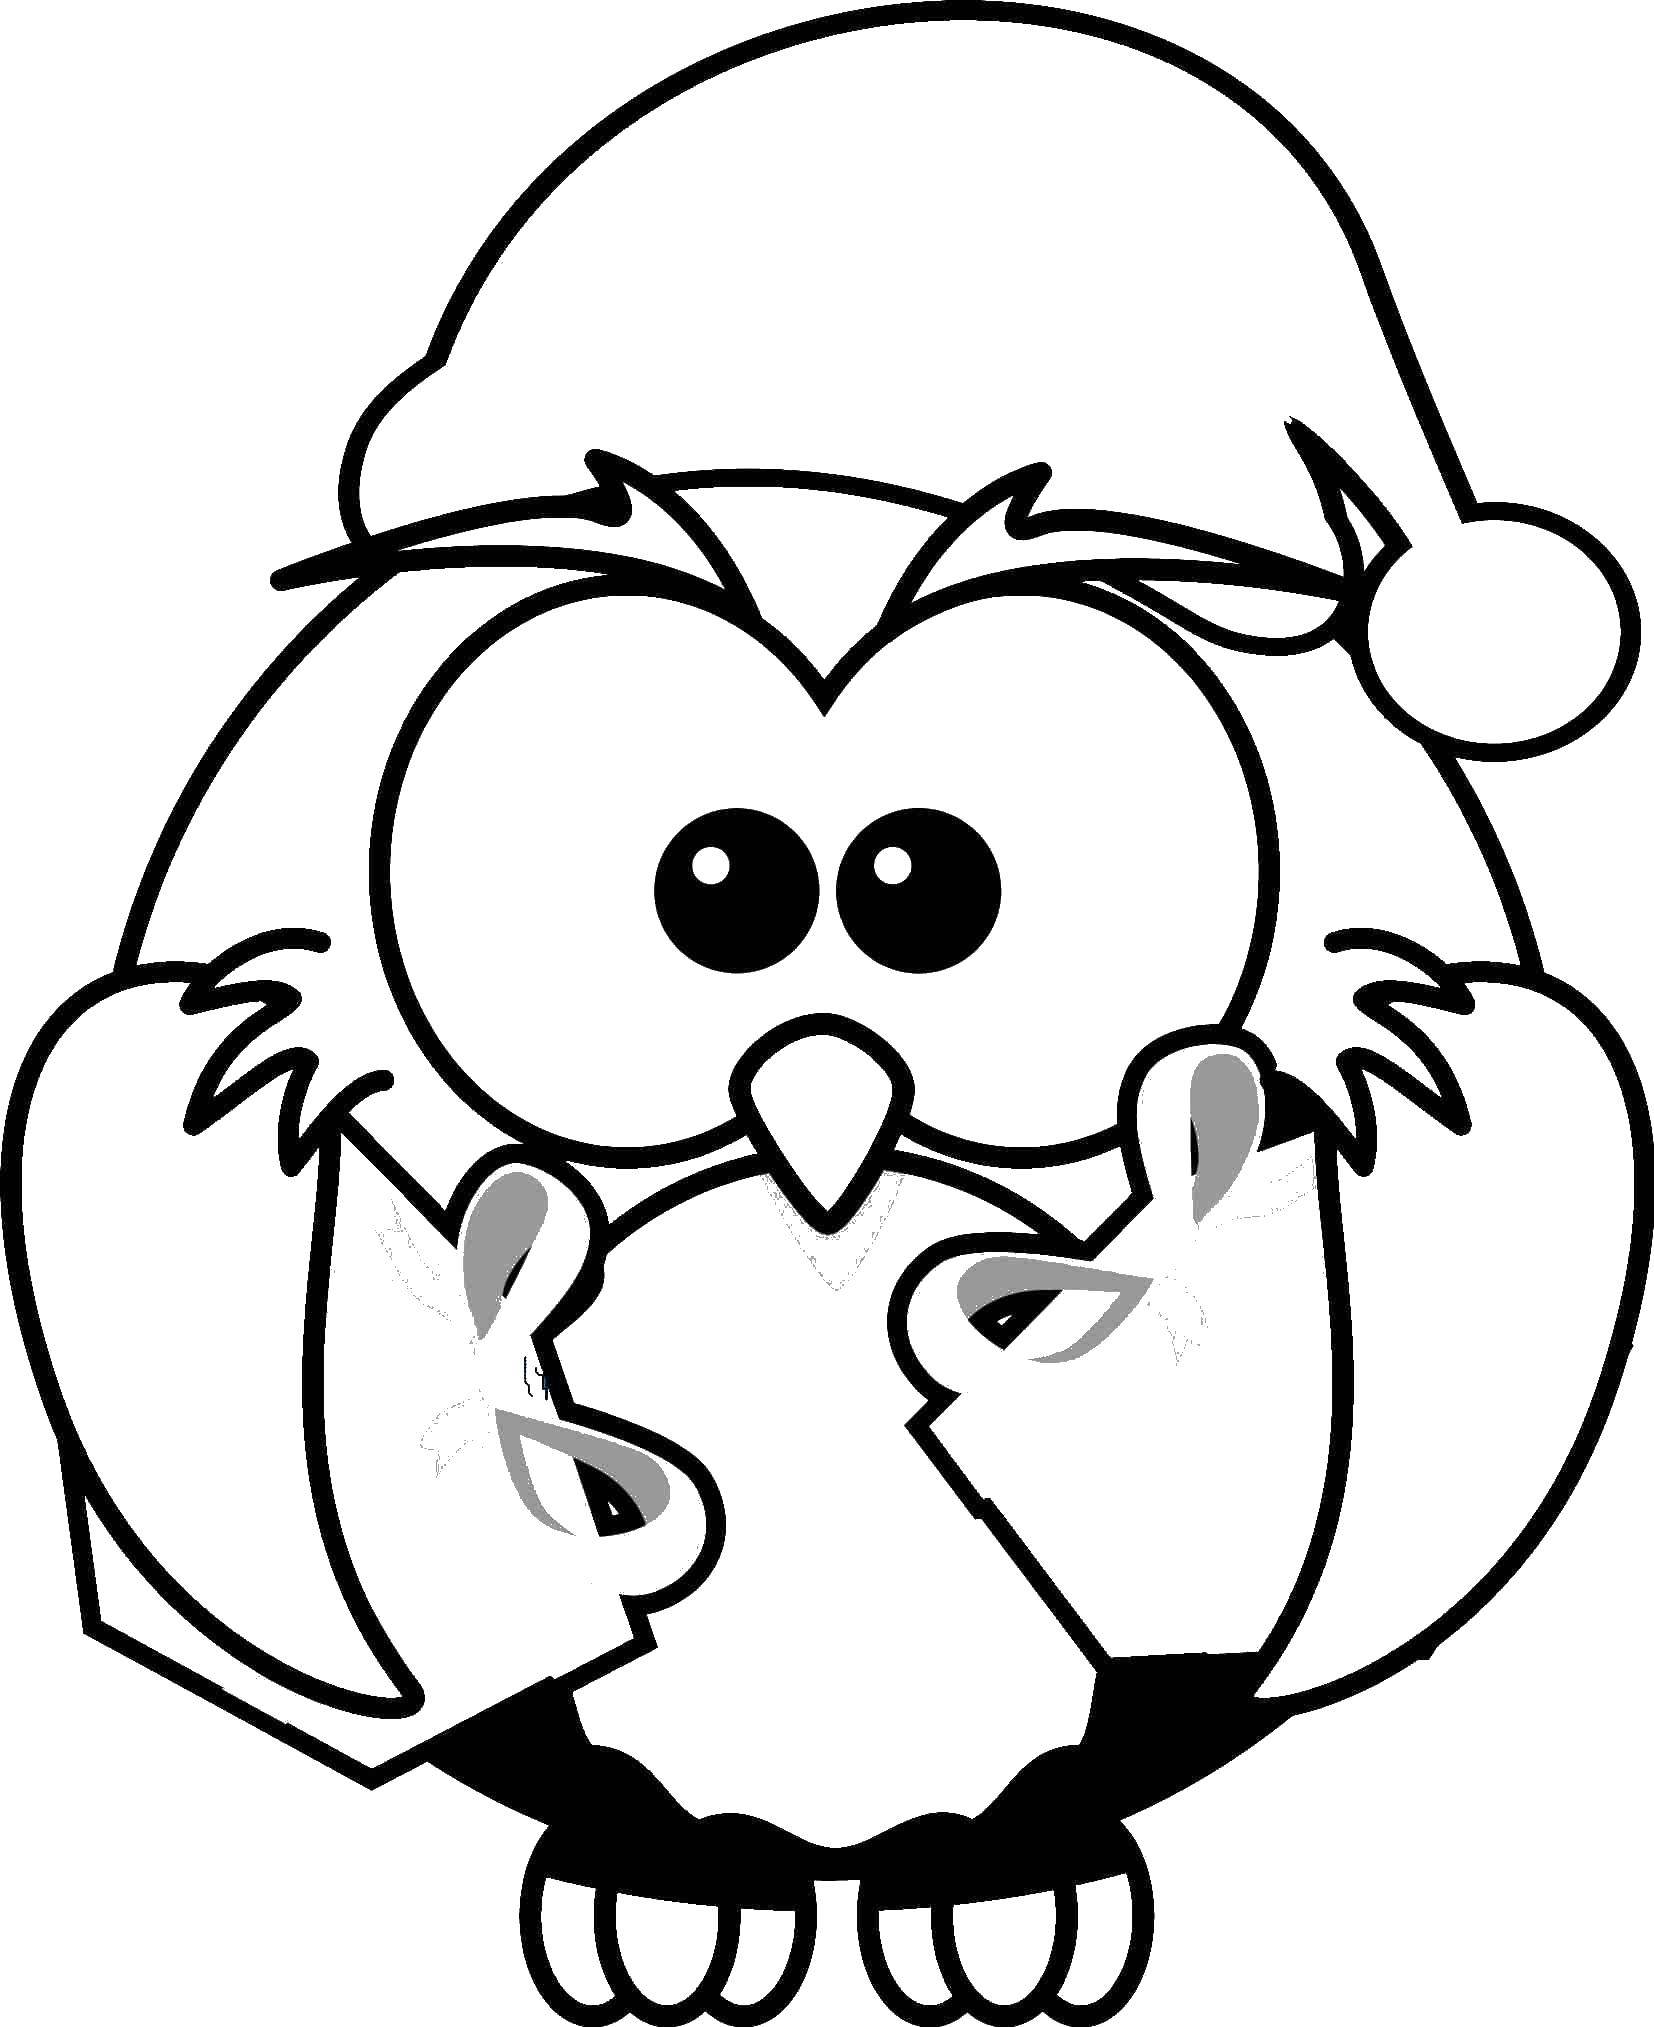 Coloring Sovushka. Category Coloring pages for kids. Tags:  Birds, owl.